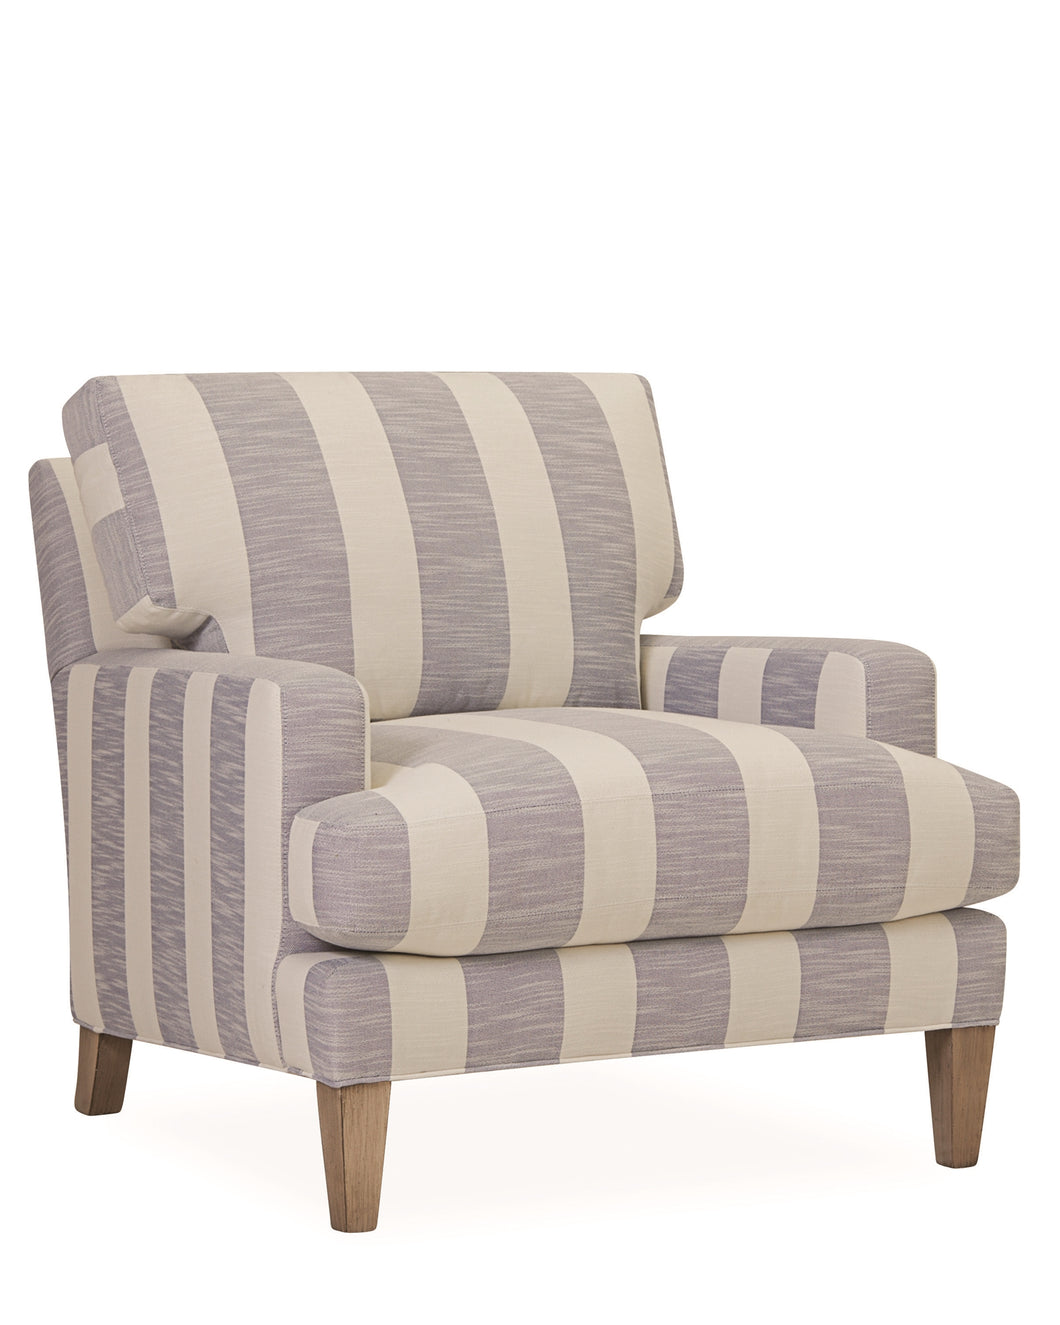 Classic Awning Stripe Chair